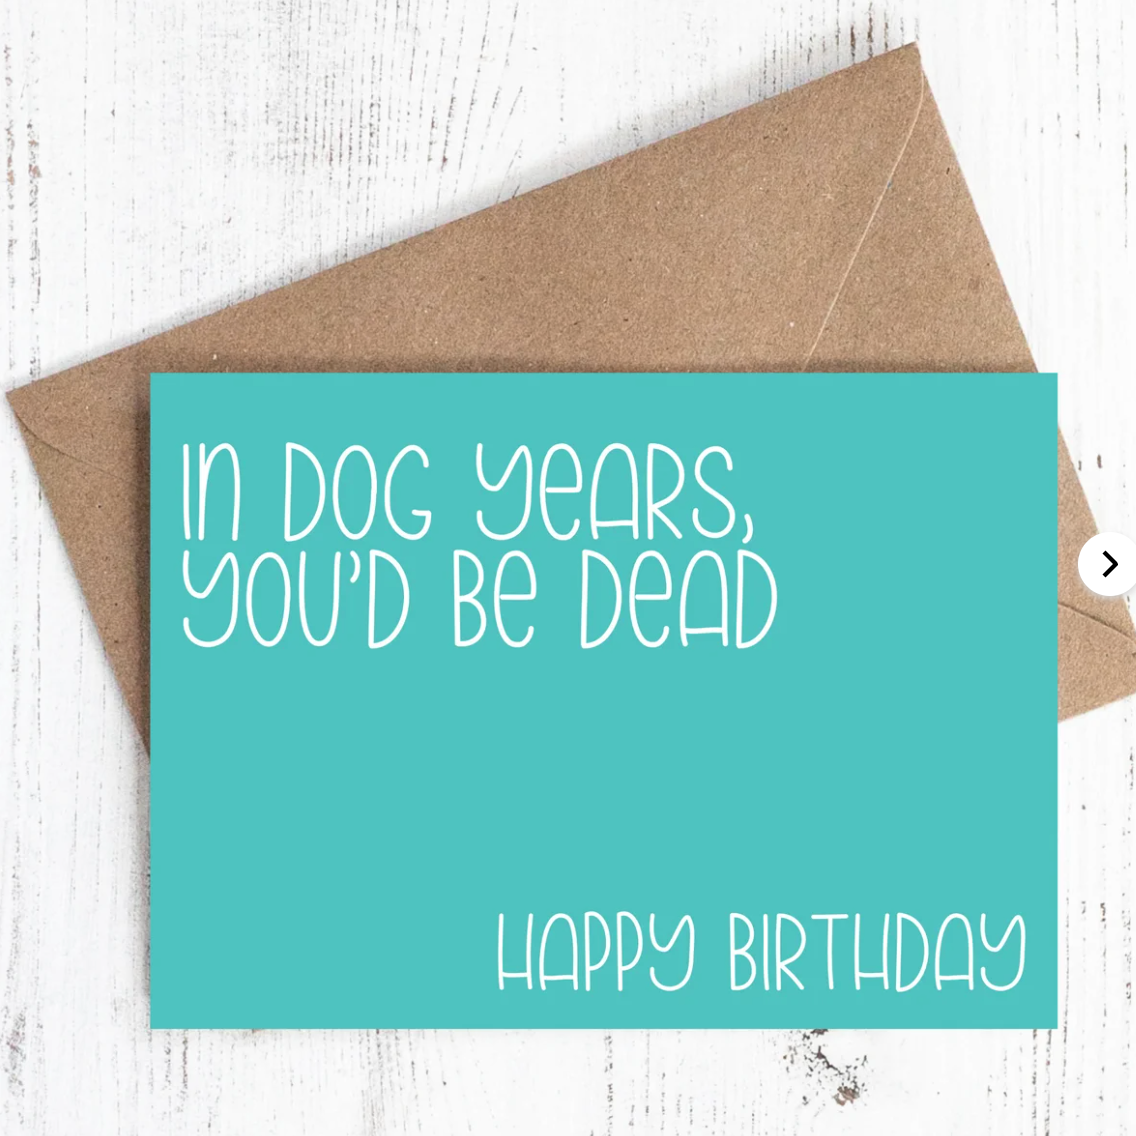 In dog years you'd be dead. Happy Birthday